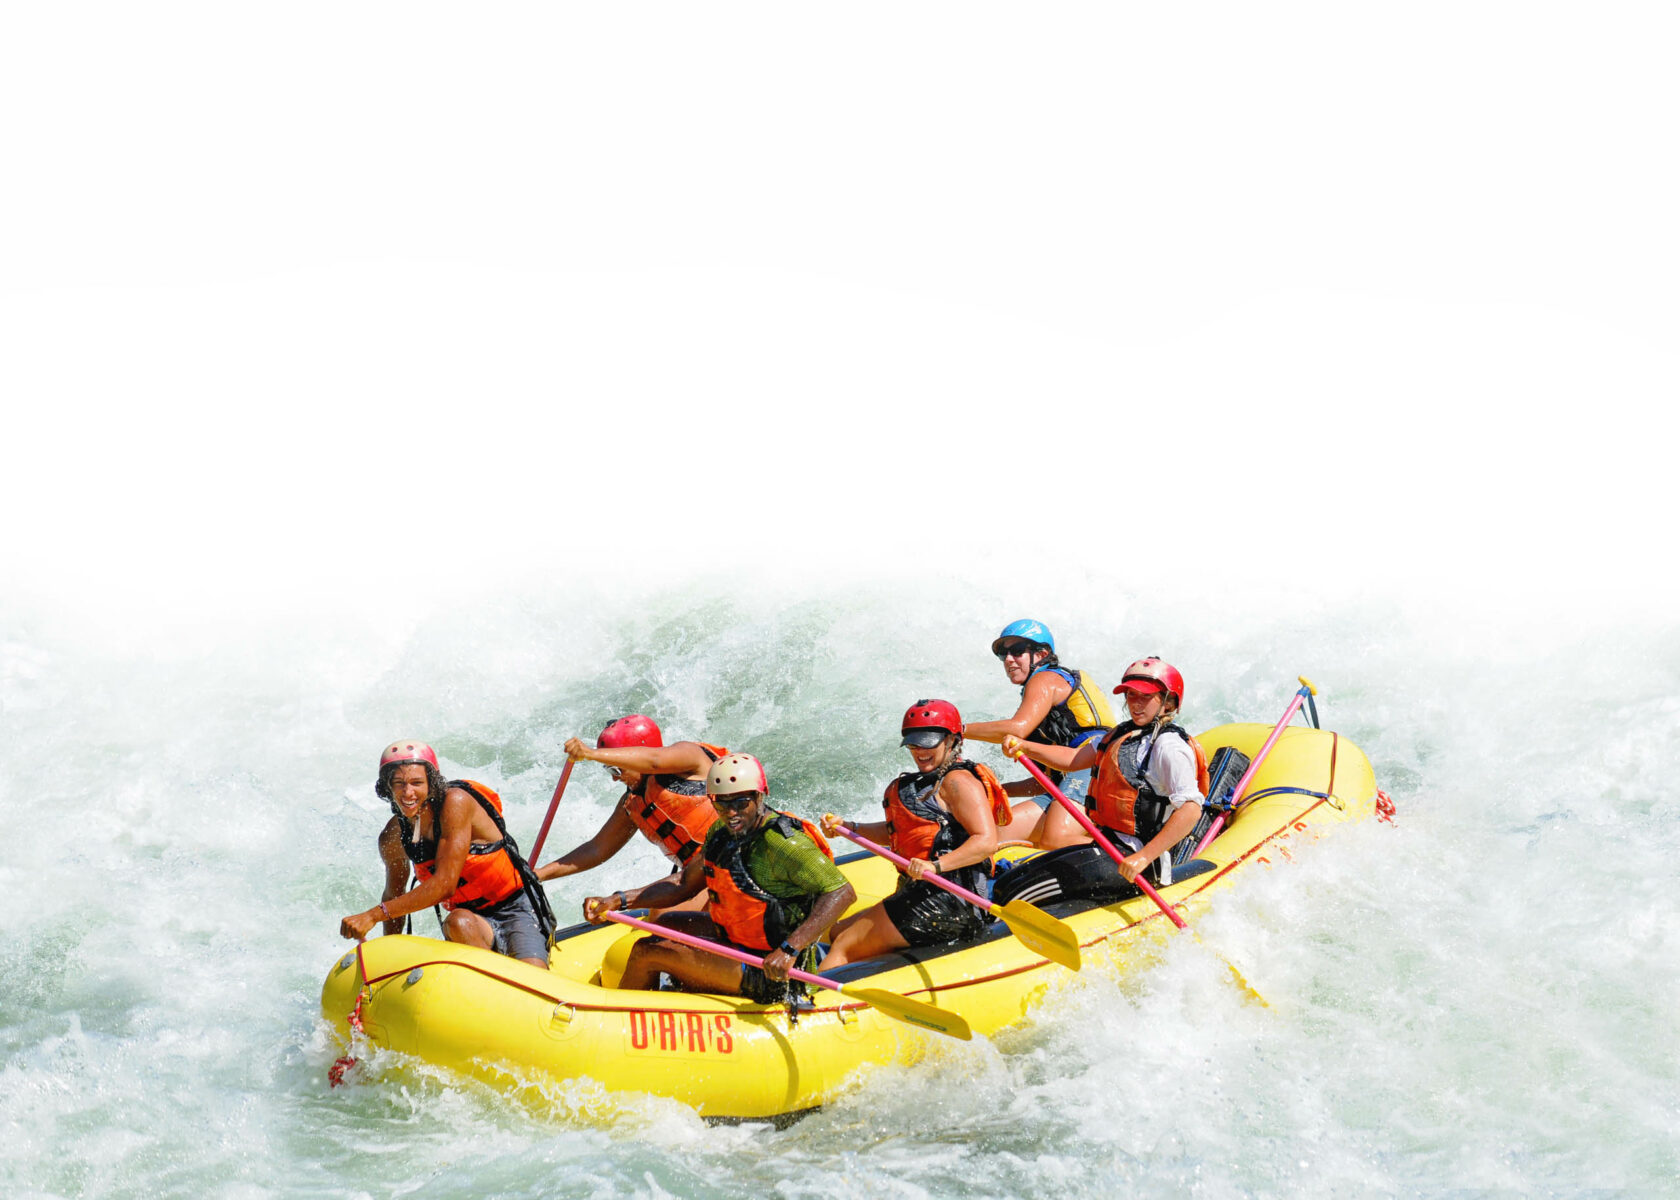 Group white water rafting in the American River.